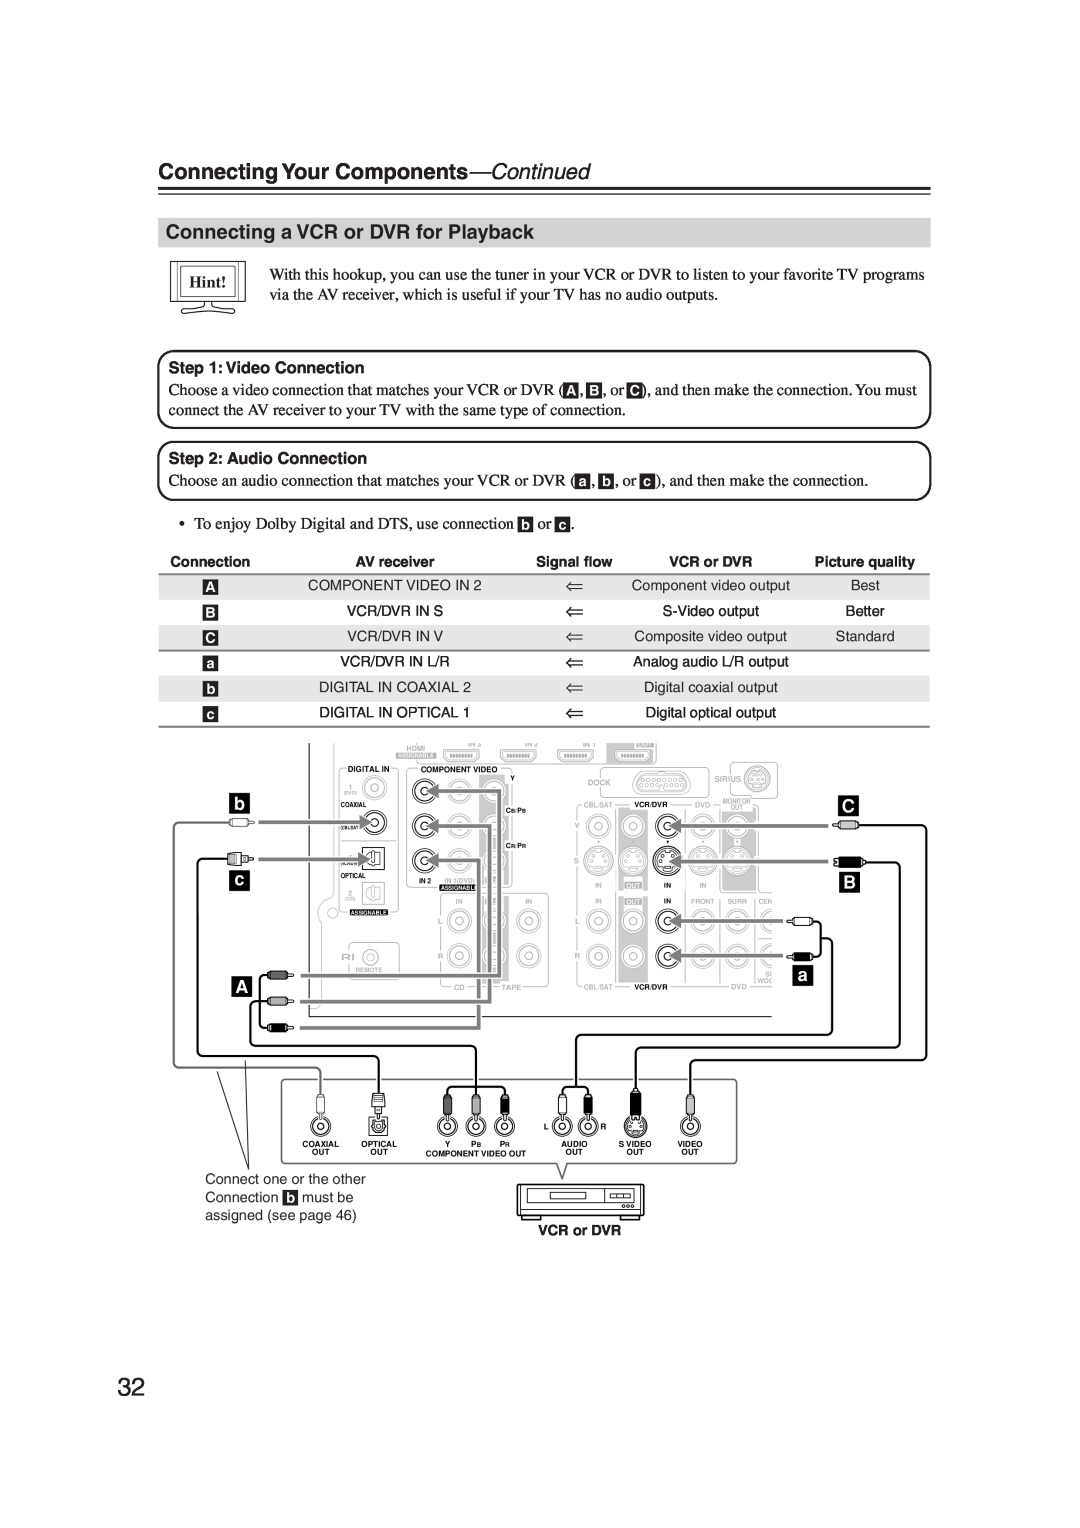 Onkyo S5100 instruction manual Connecting a VCR or DVR for Playback, Connecting Your Components—Continued, Hint 